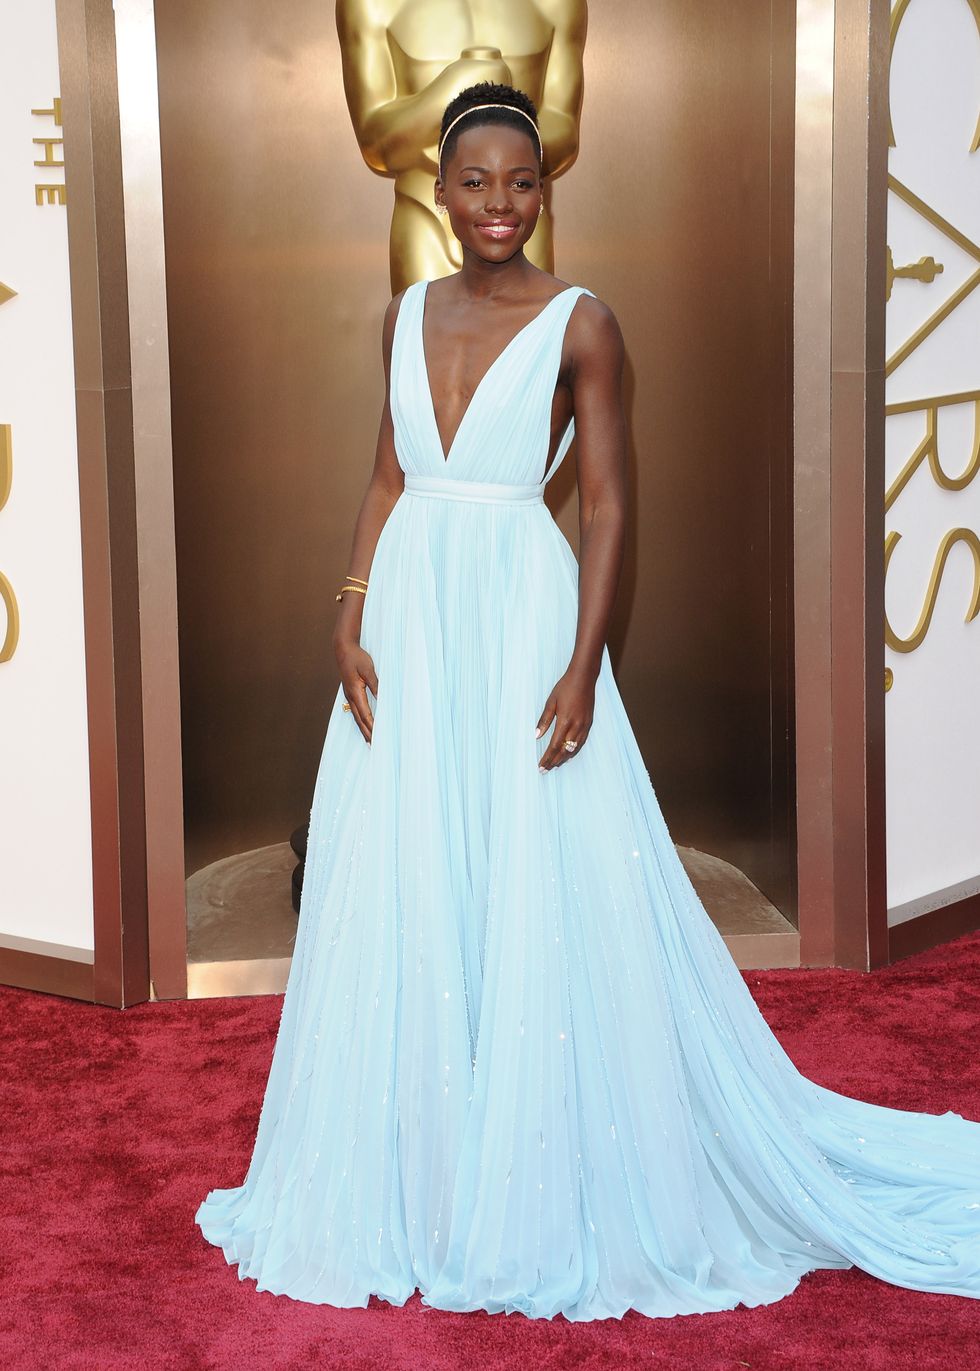 hollywood, ca march 02 actress lupita nyongo arrives at the 86th annual academy awards at hollywood  highland center on march 2, 2014 in hollywood, california photo by axellebauer griffinfilmmagic